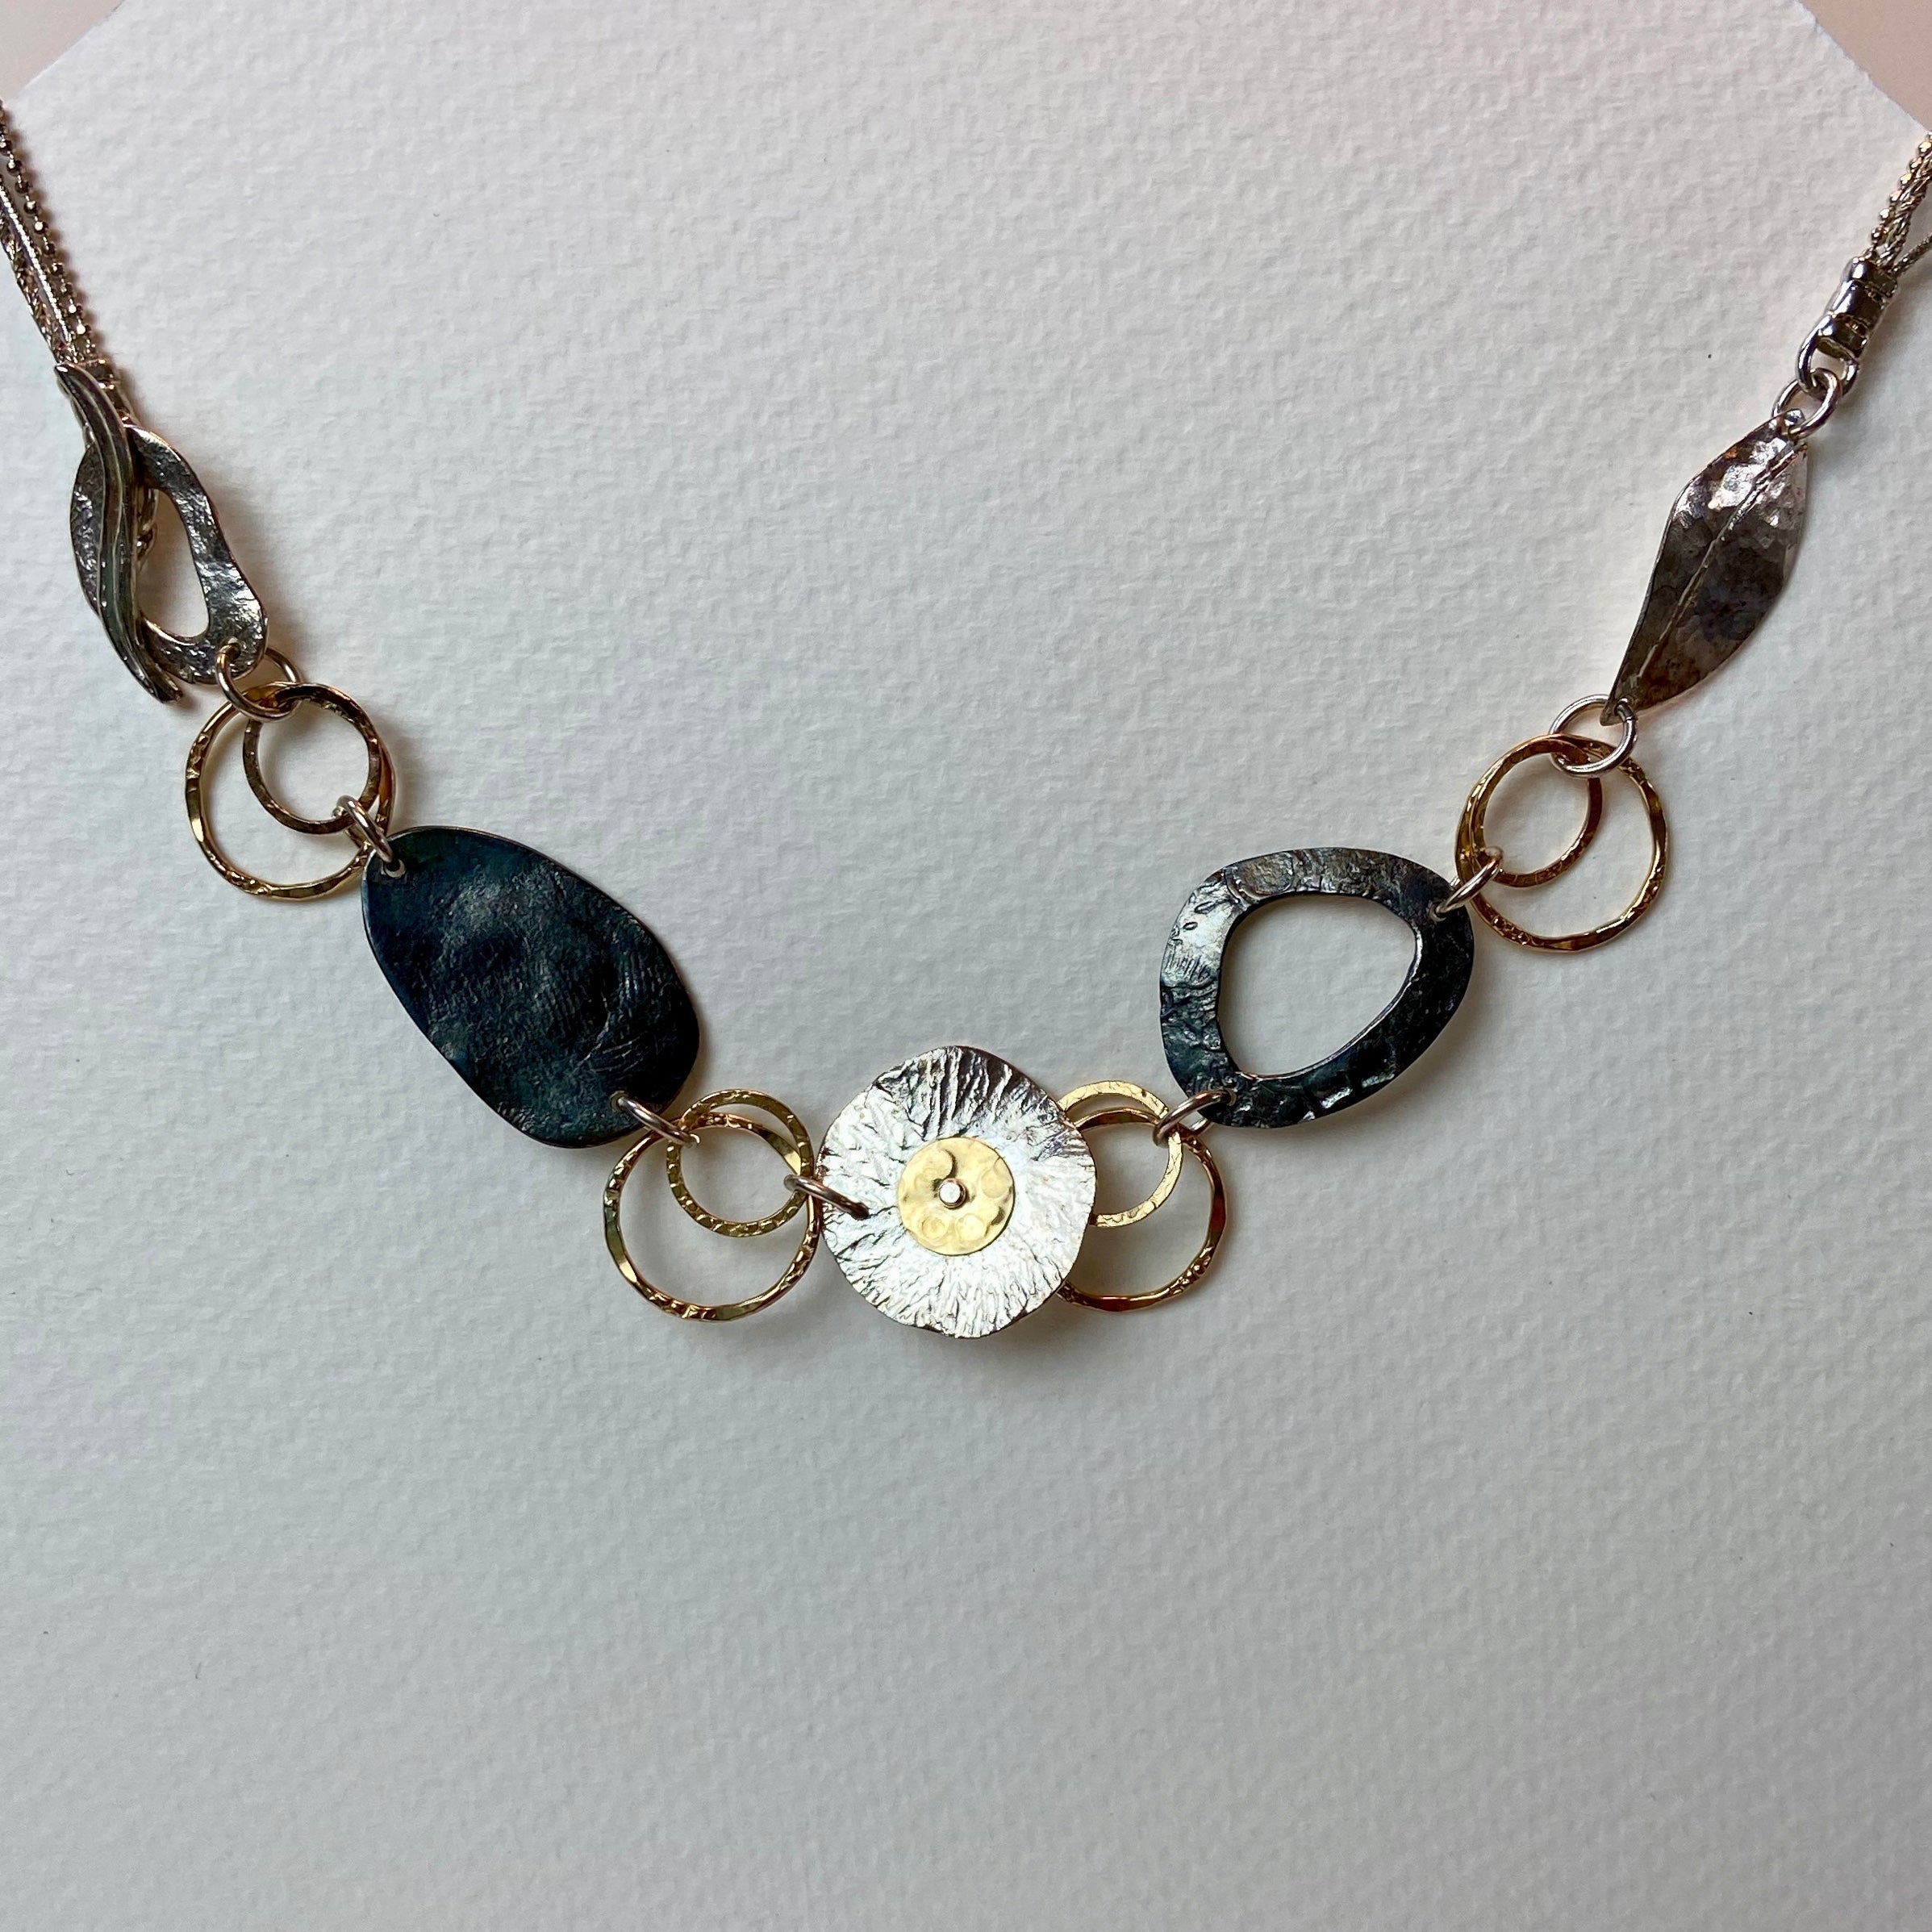 Silver Gold hoop and Disc Necklace - The Nancy Smillie Shop - Art, Jewellery & Designer Gifts Glasgow